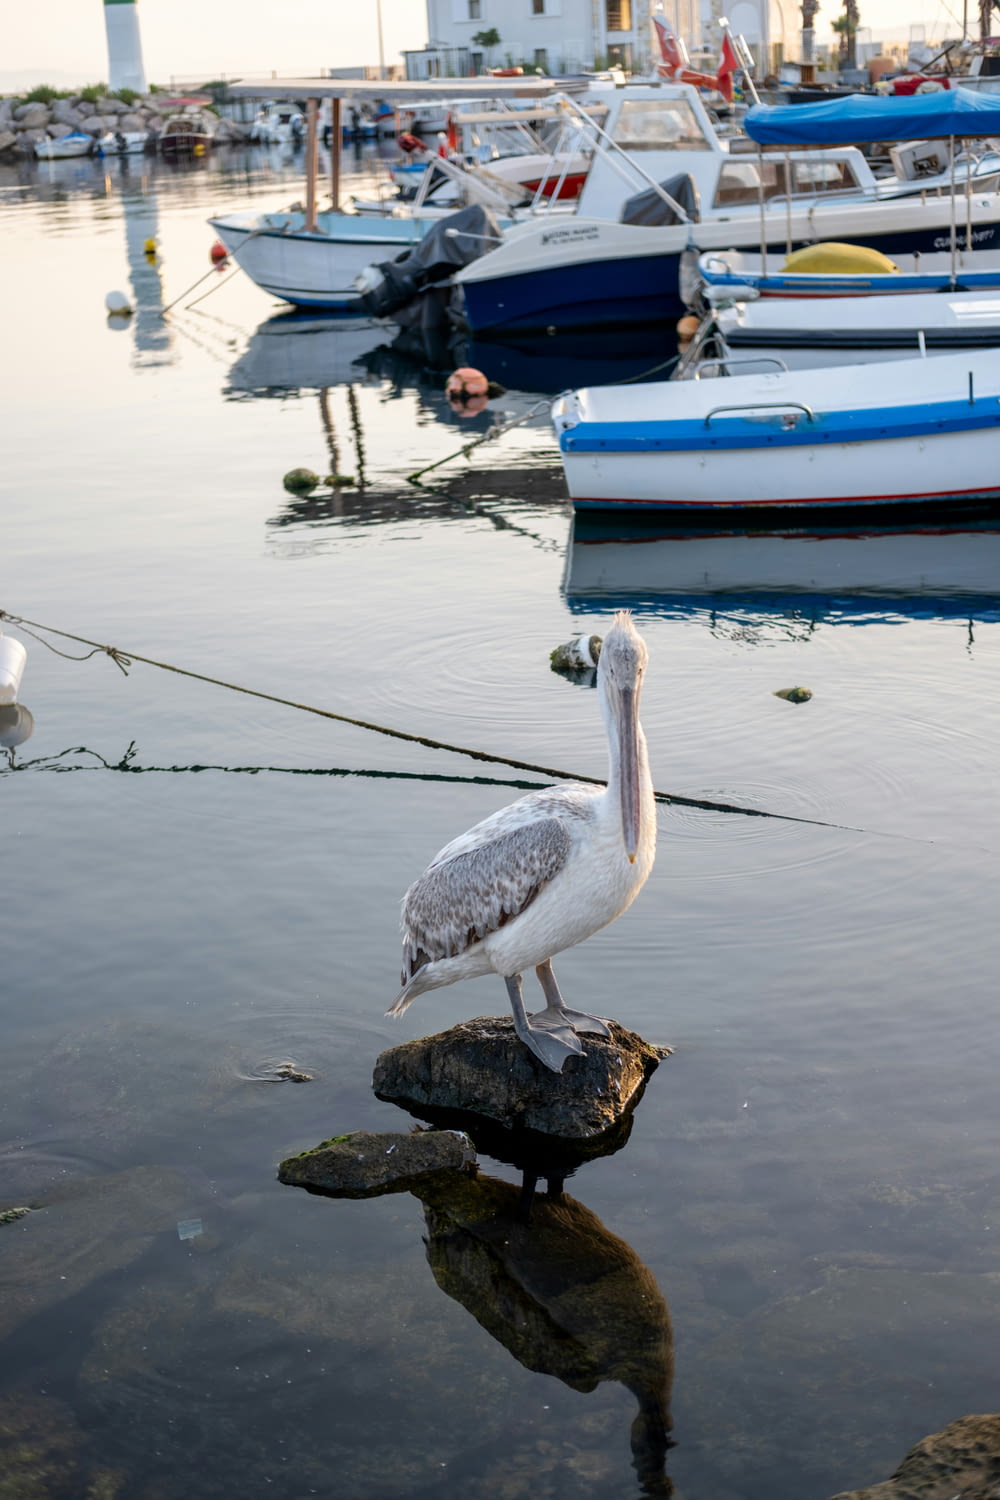 a pelican is standing on a rock in the water